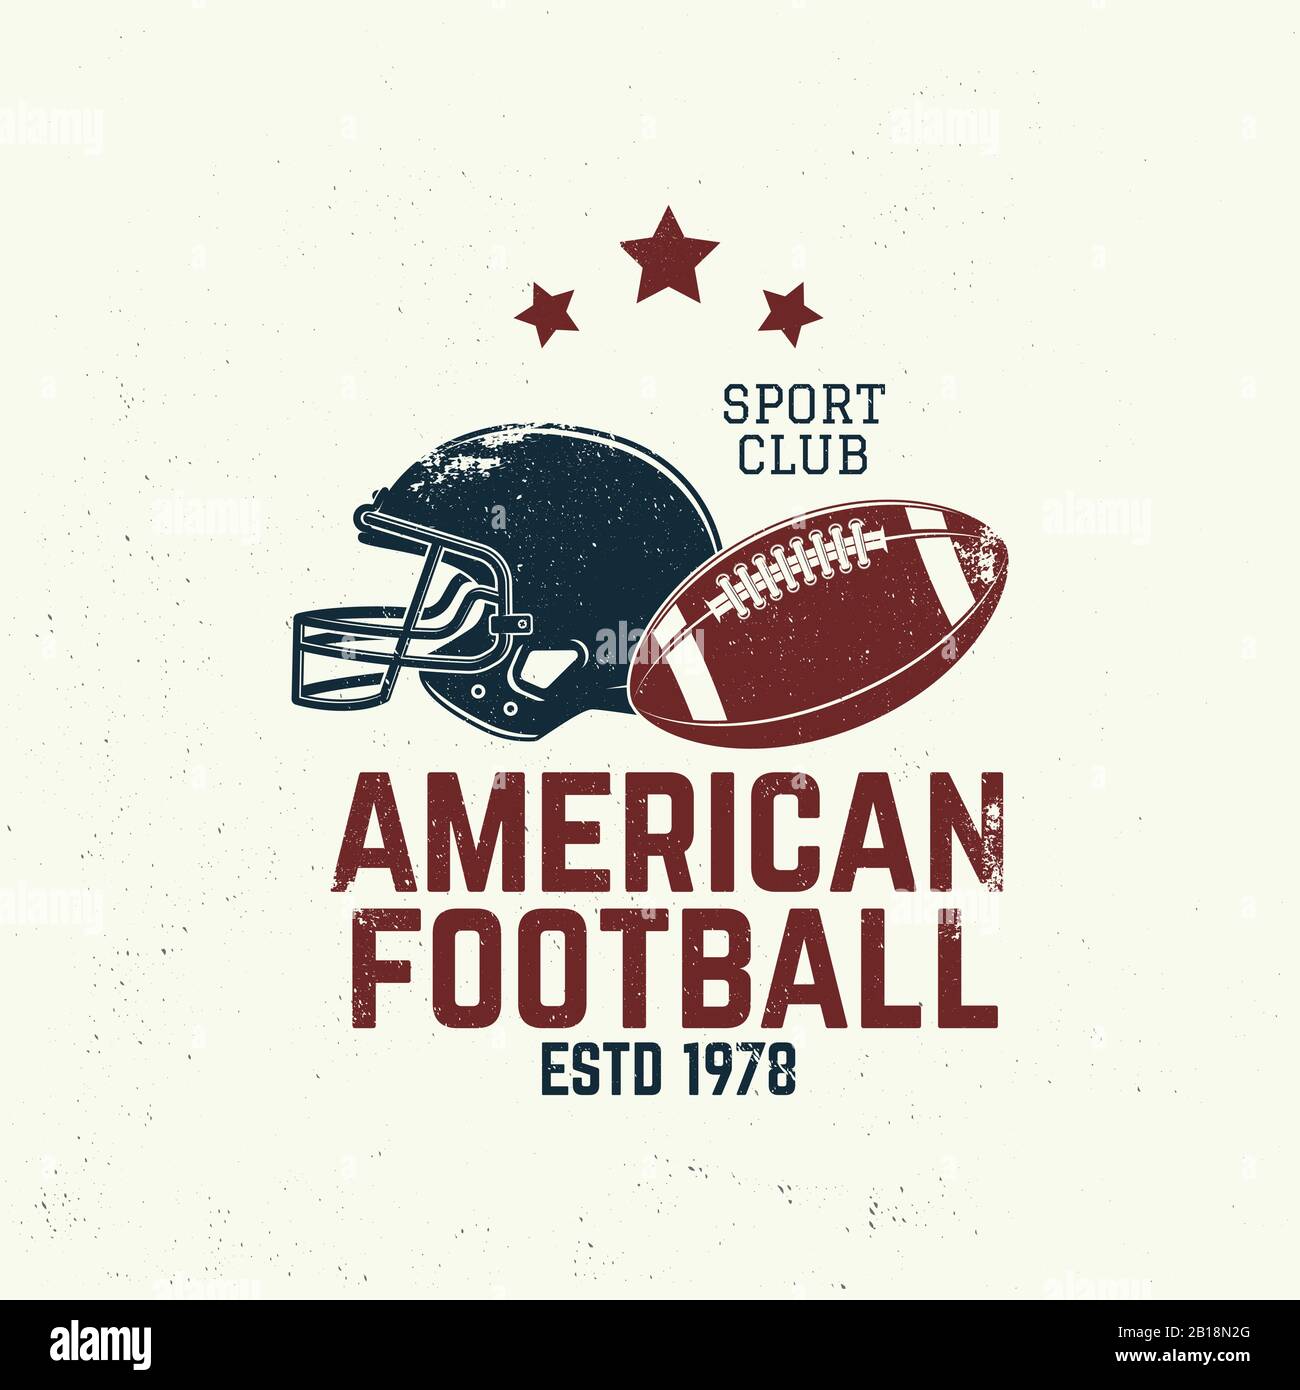 American football or rugby club badge. Vector illustration. Concept for shirt, logo, print, stamp, tee, patch. Vintage typography design with american football ball and helmet silhouette Stock Vector